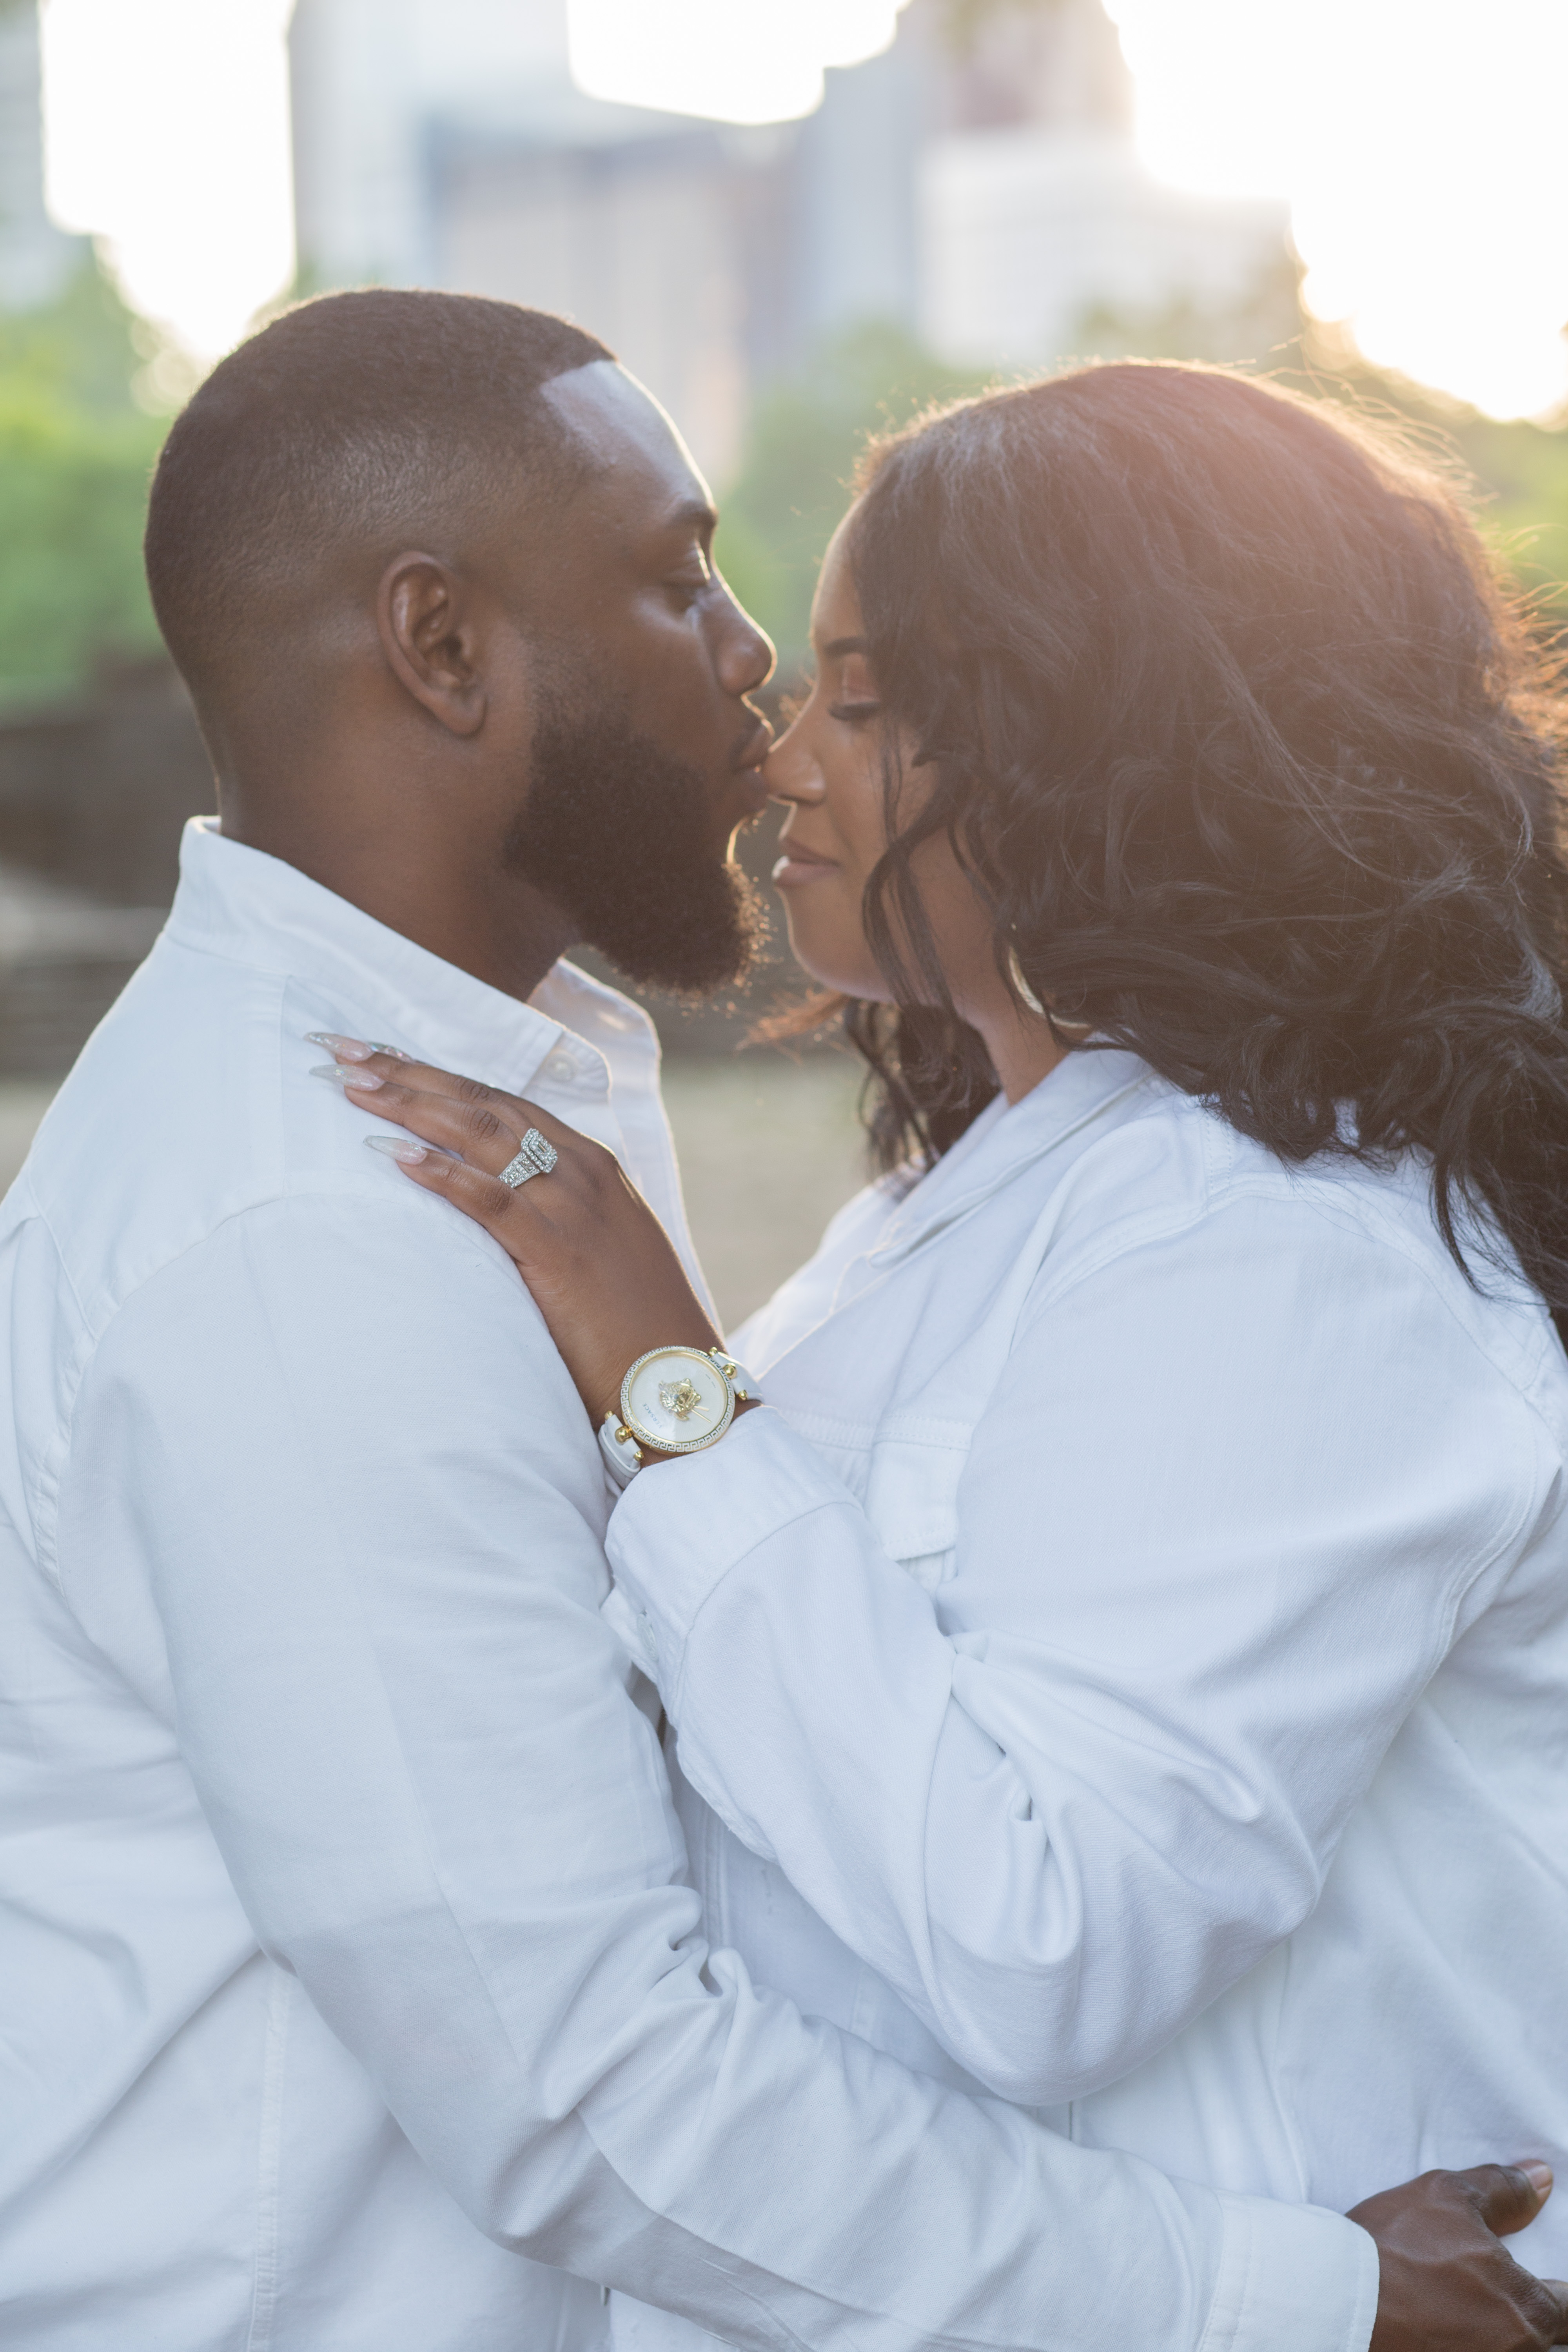 As he gently kissed her during their engagement session